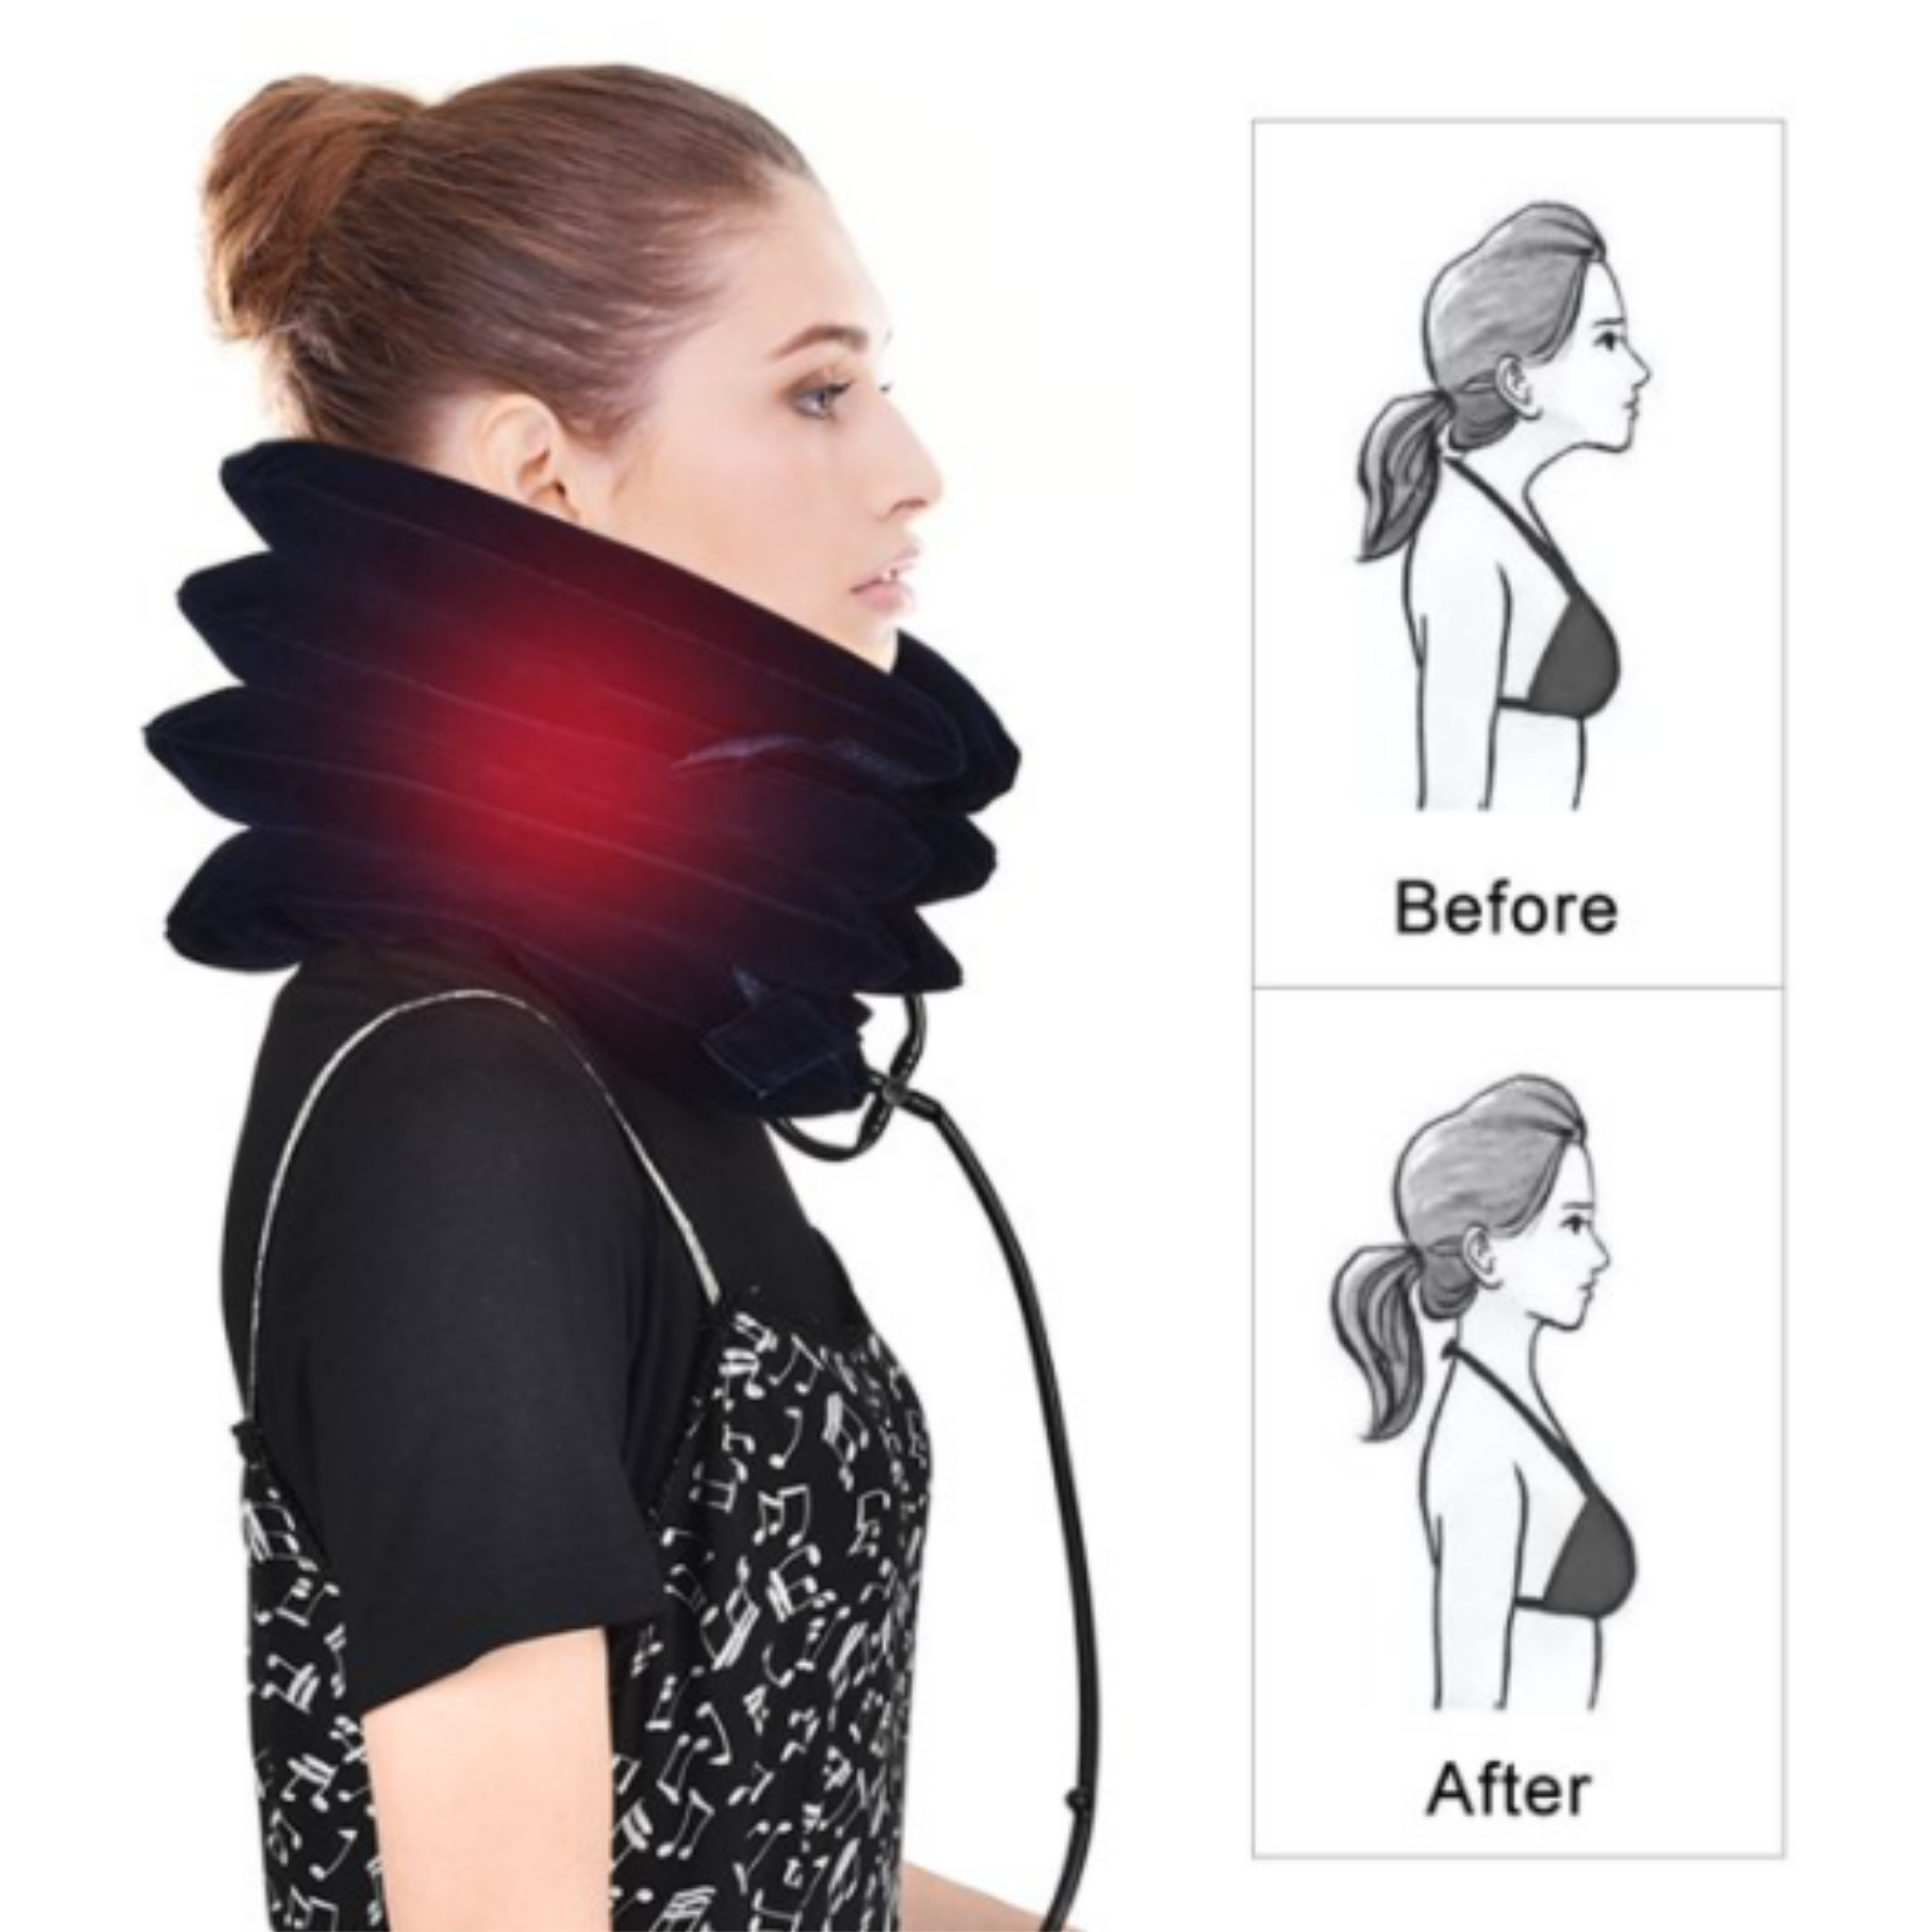 This inflatable neck pillow is perfect for if you have neck pain or your shoulder and neck feel stiff. The travel neck pillow makes you feel comfortable and non-pressurized. This travel pillow is your perfect companion for the office, train/ plane travel, home. This cervical neck traction device is easy to inflate with the hand pump. Although neck pillow for traveling purposes, yet it can be used at home also.